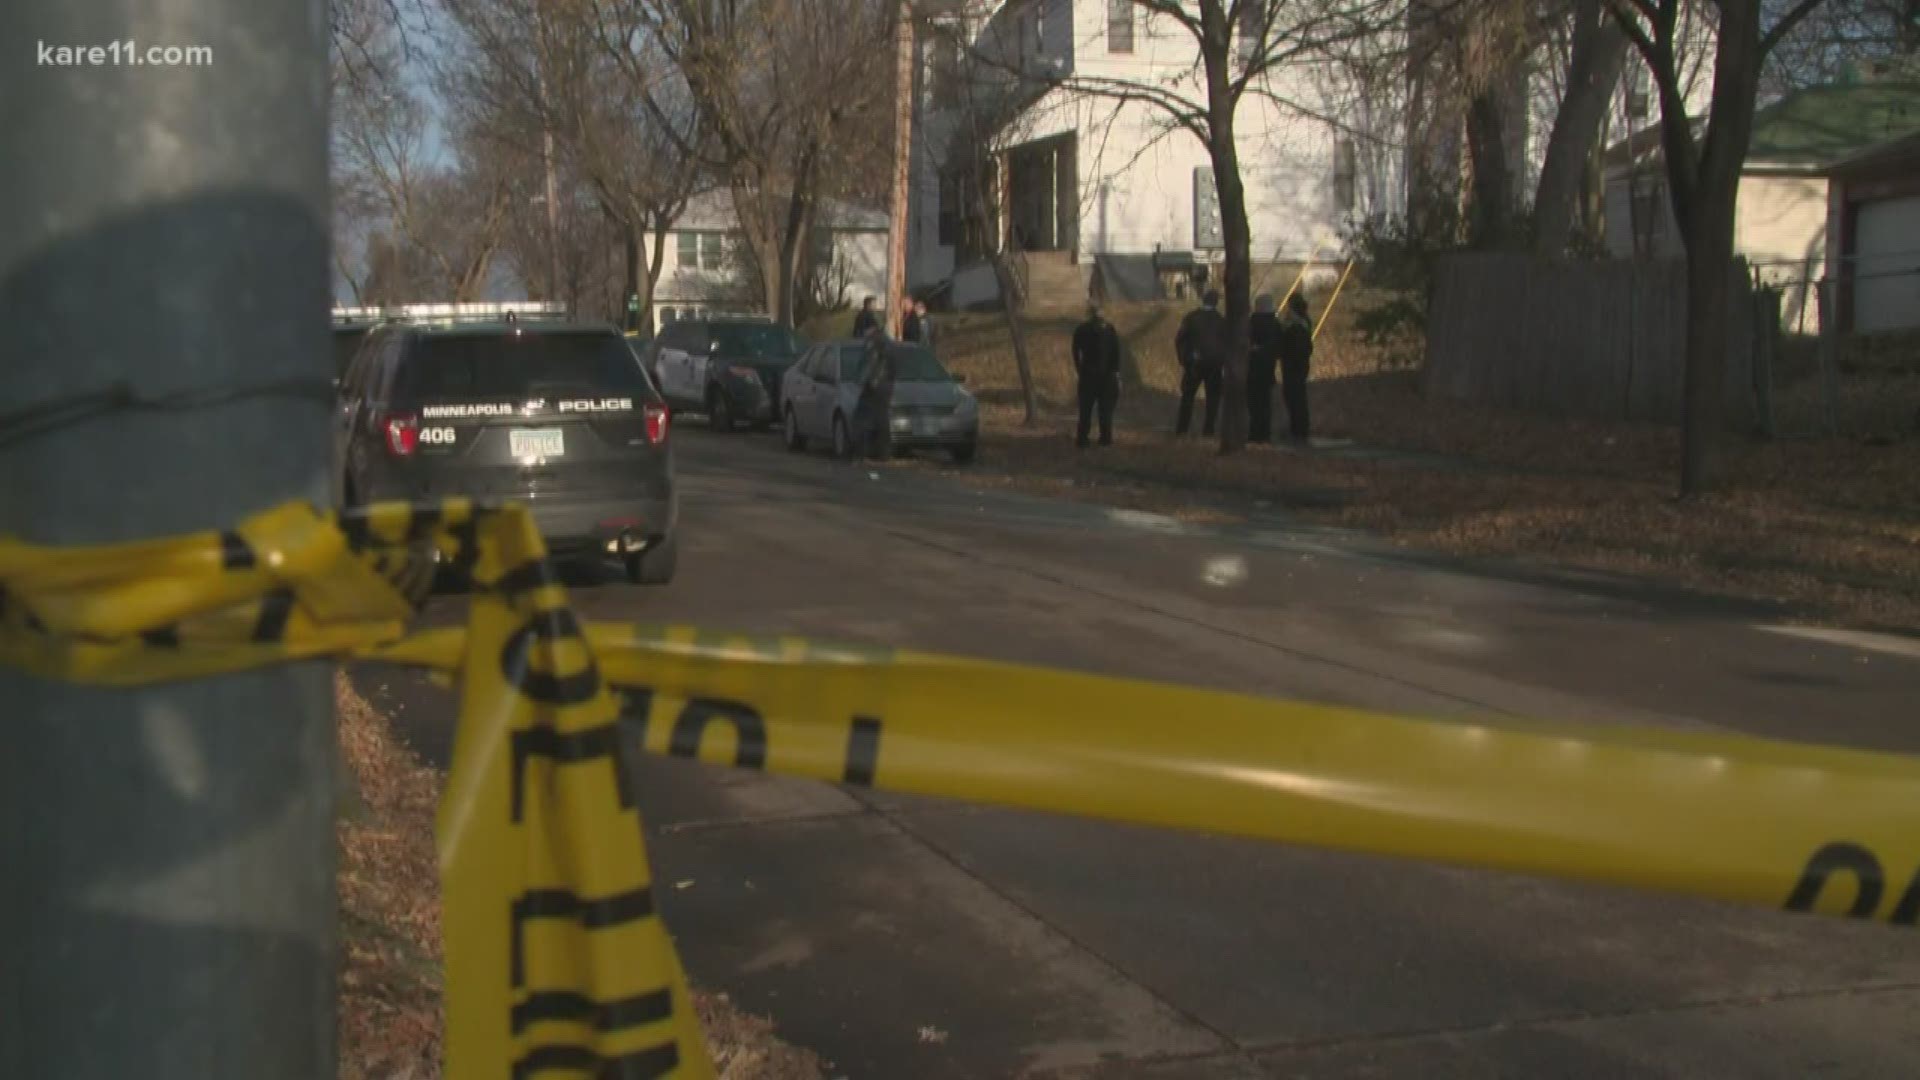 Two men and one woman were injured in the shooting, but are expected to survive.